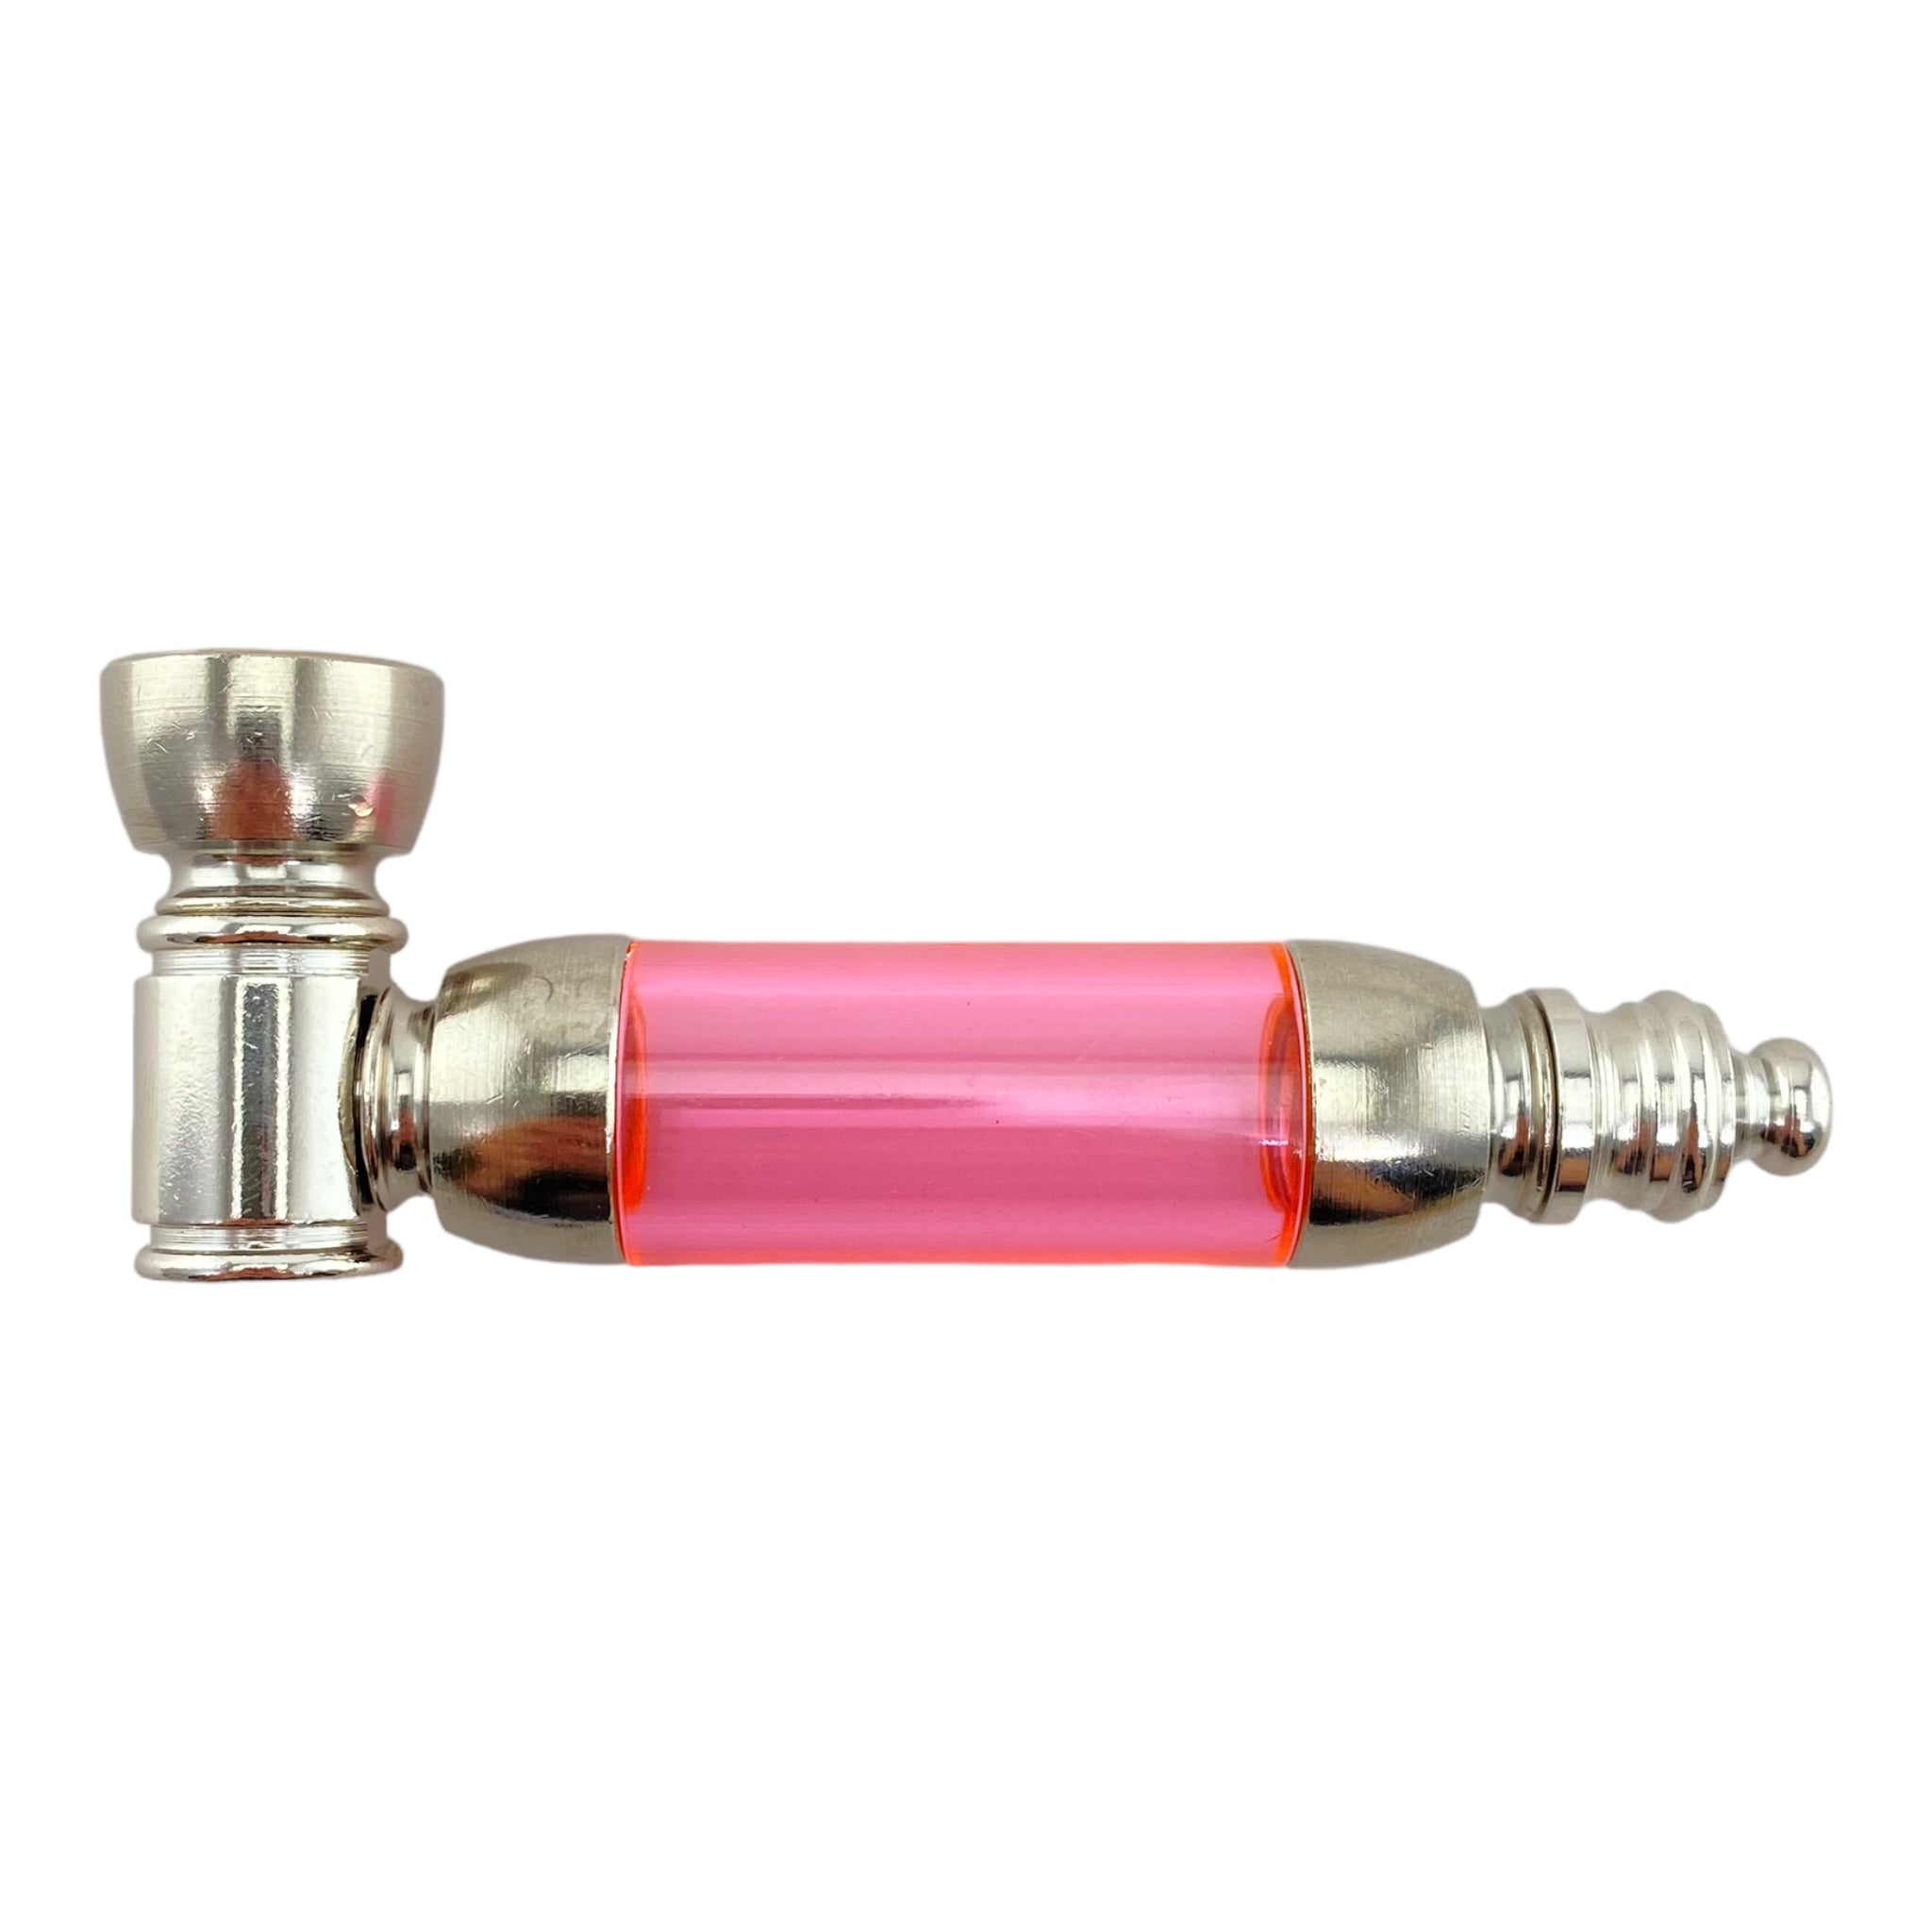 cute girly Metal Hand Pipes - Silver Chrome Hand Pipe With Large Pink Plastic Chamber